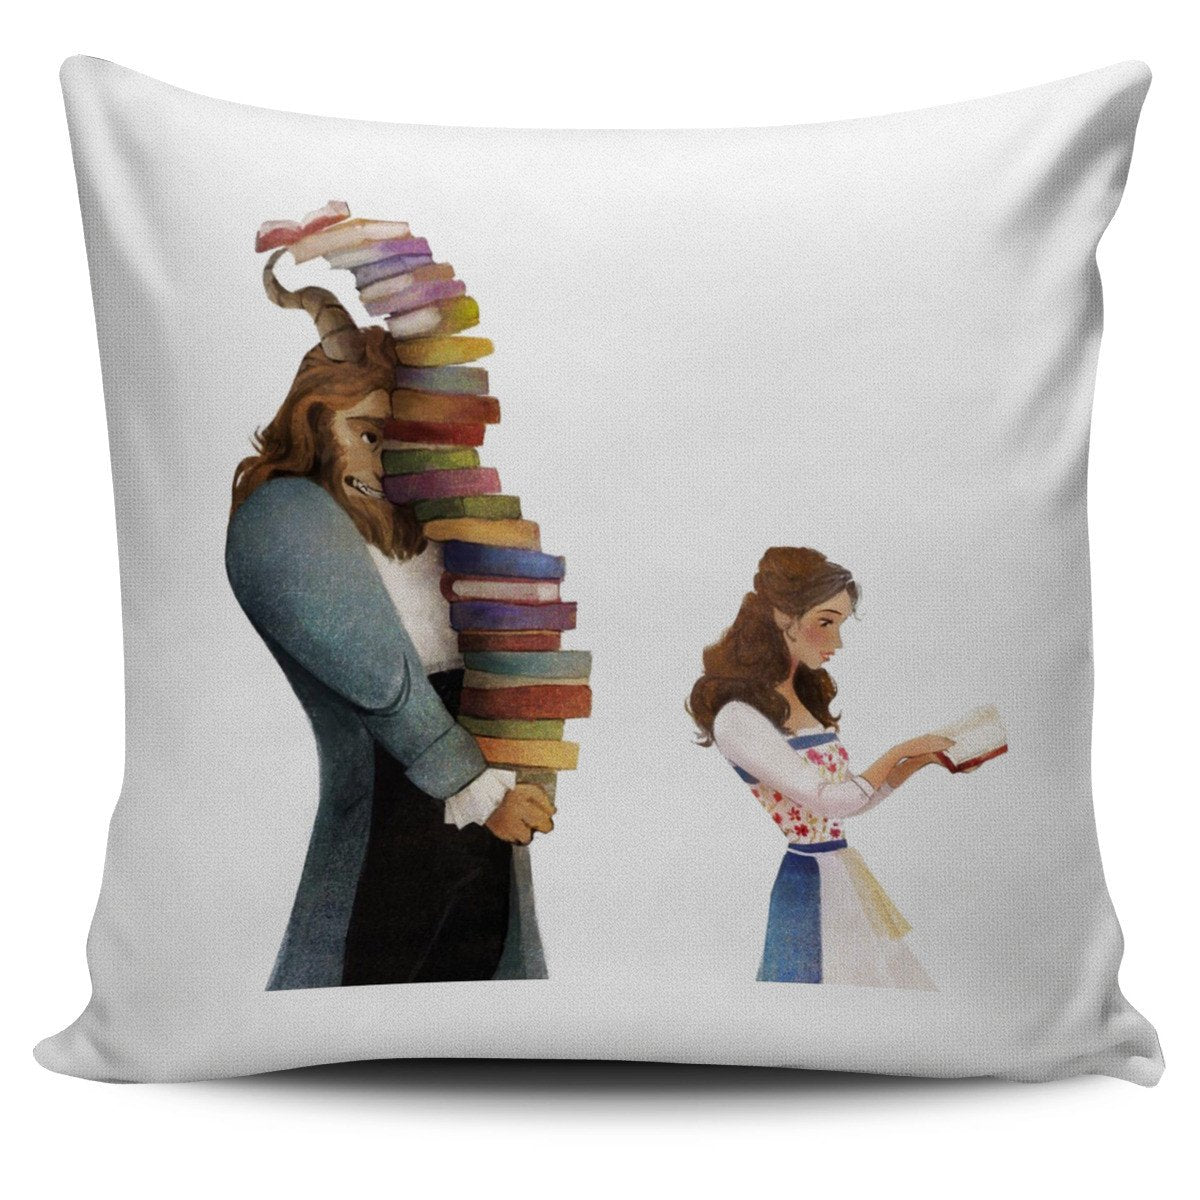 Beauty And The Beast Pillow Cover